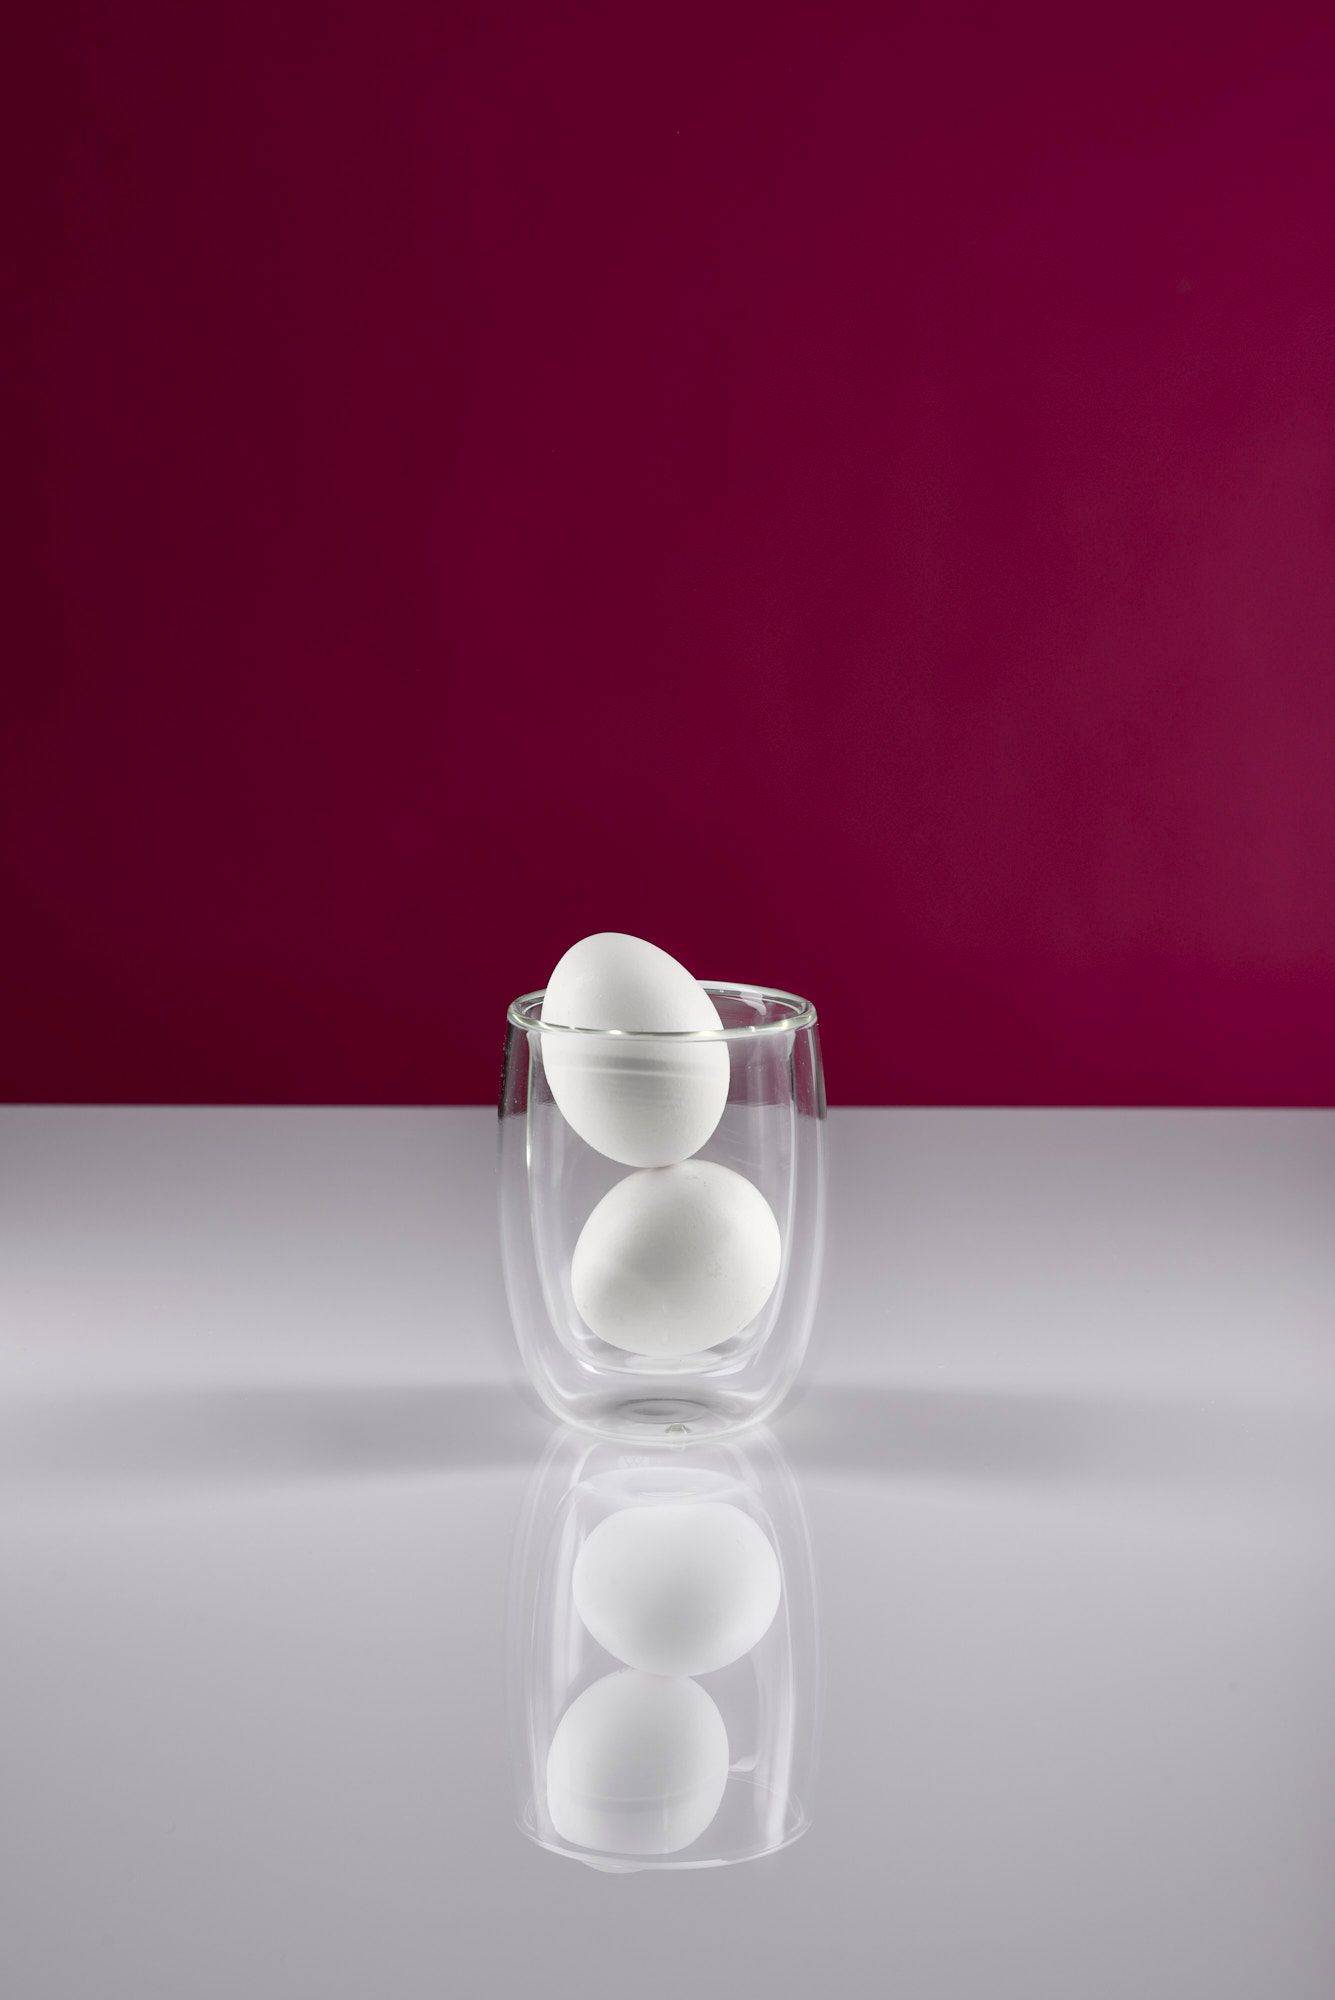 two white eggs in a glass with white and pink background